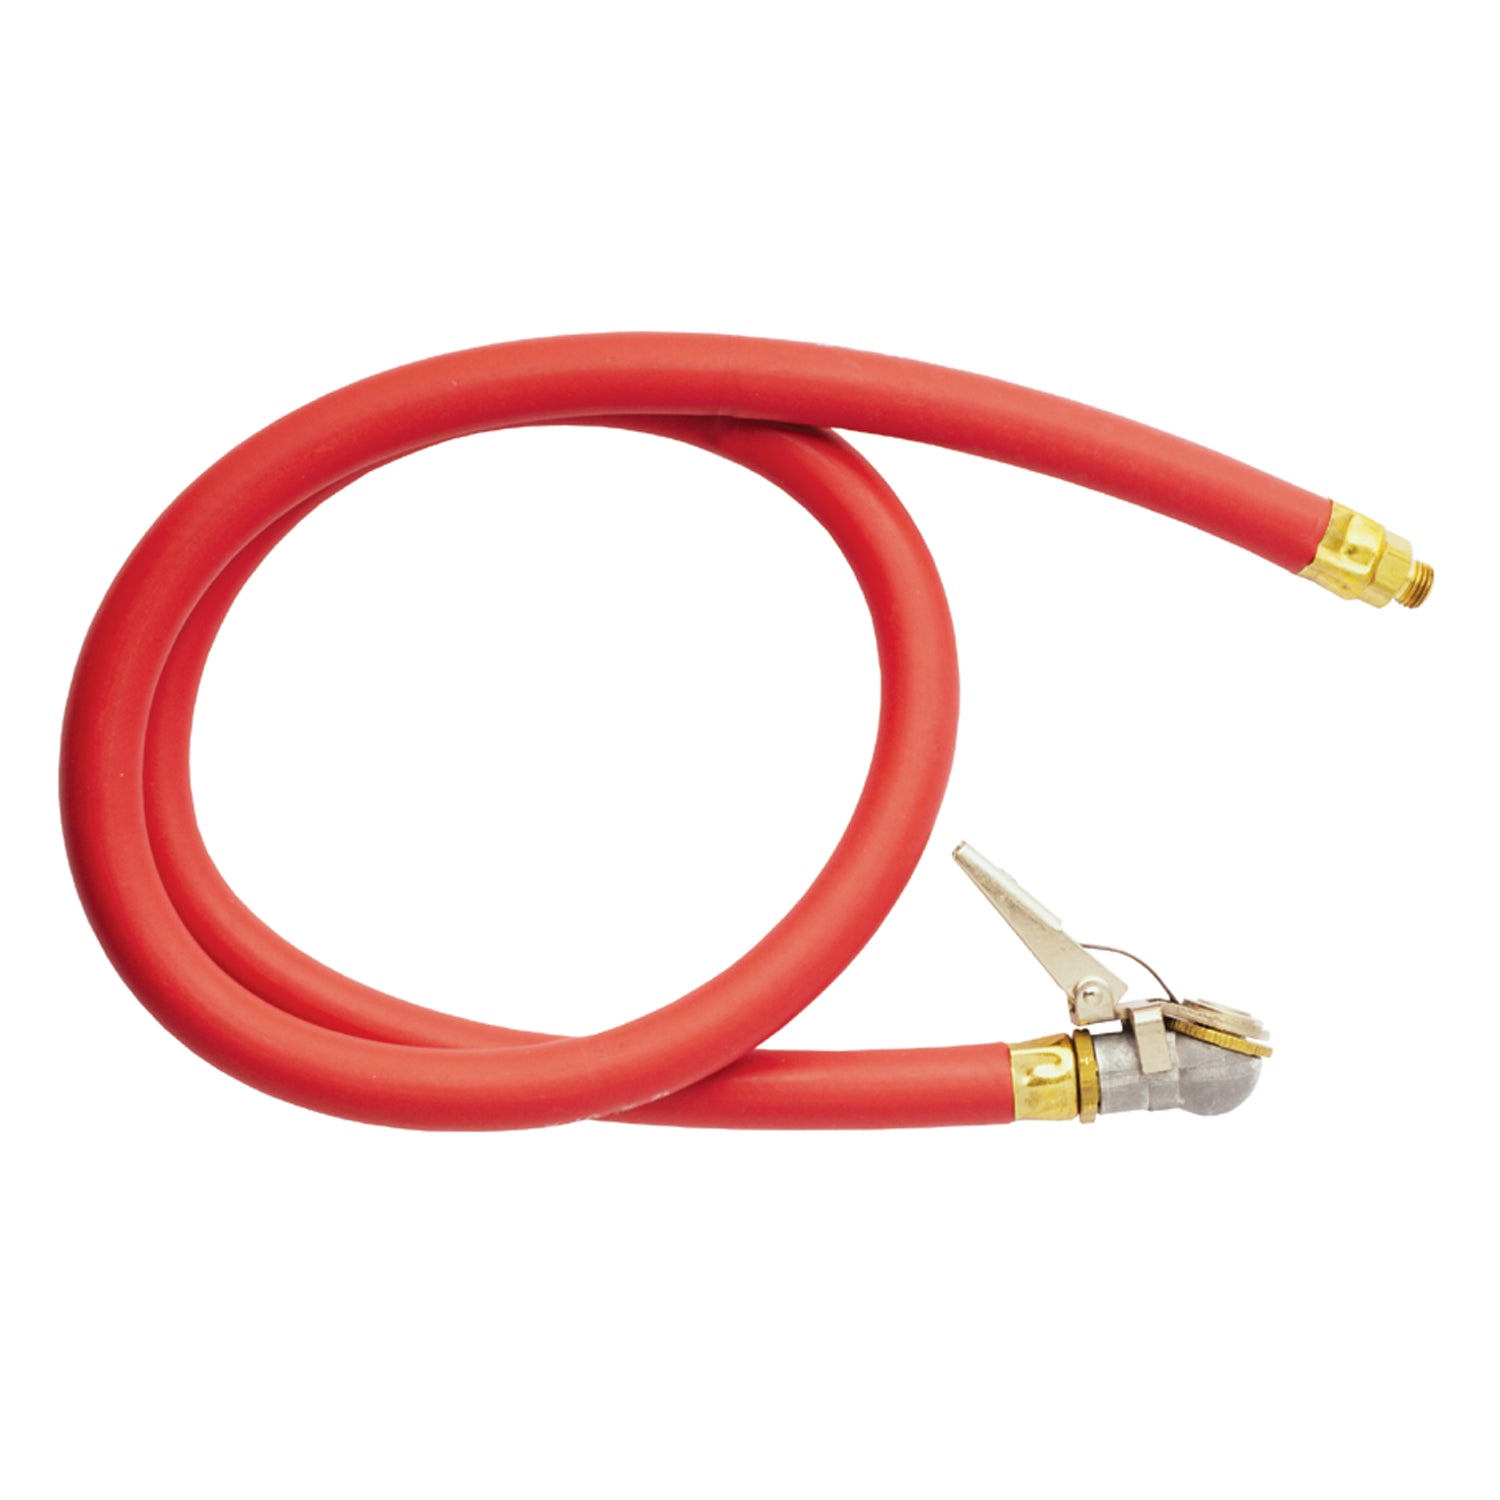 3' Hose Whip w/ Single Head, Replacement